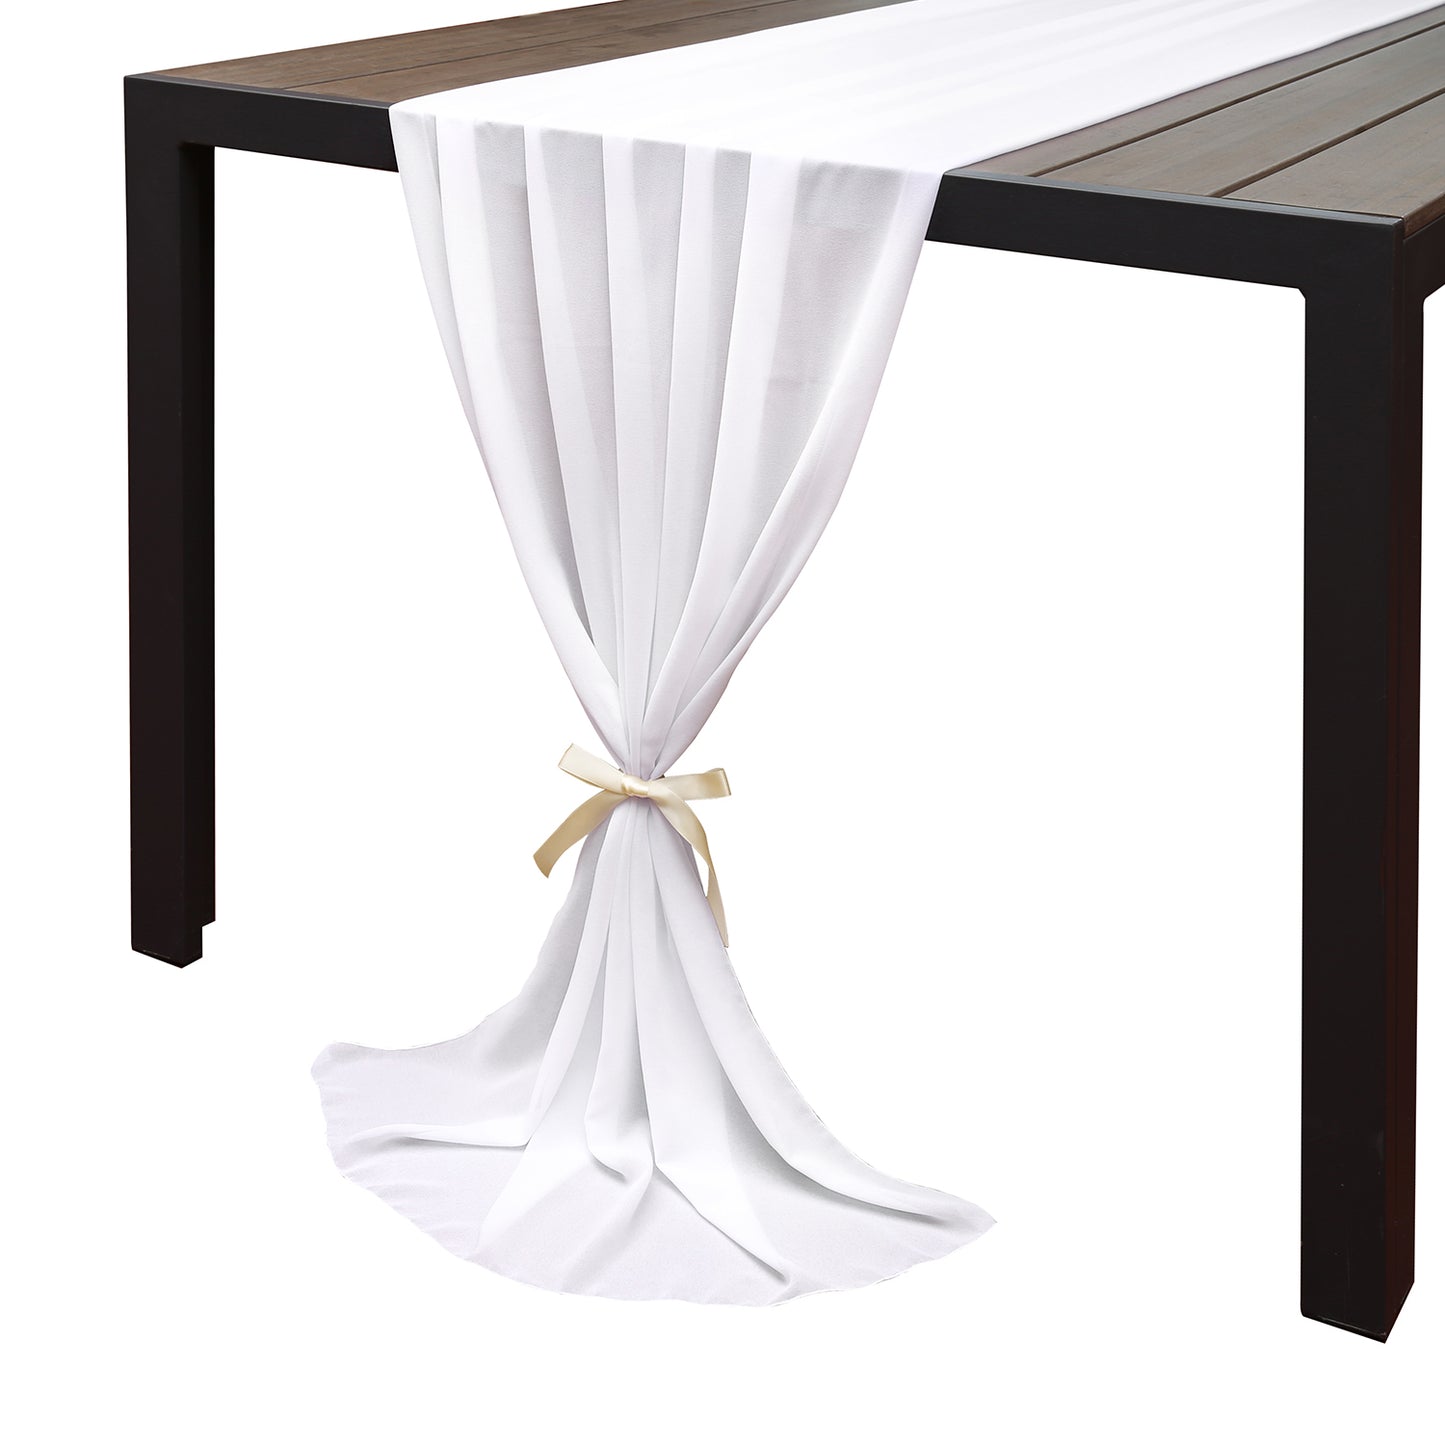  10ft Pearl Table Runner 2 Pieces Gauze Chiffon White